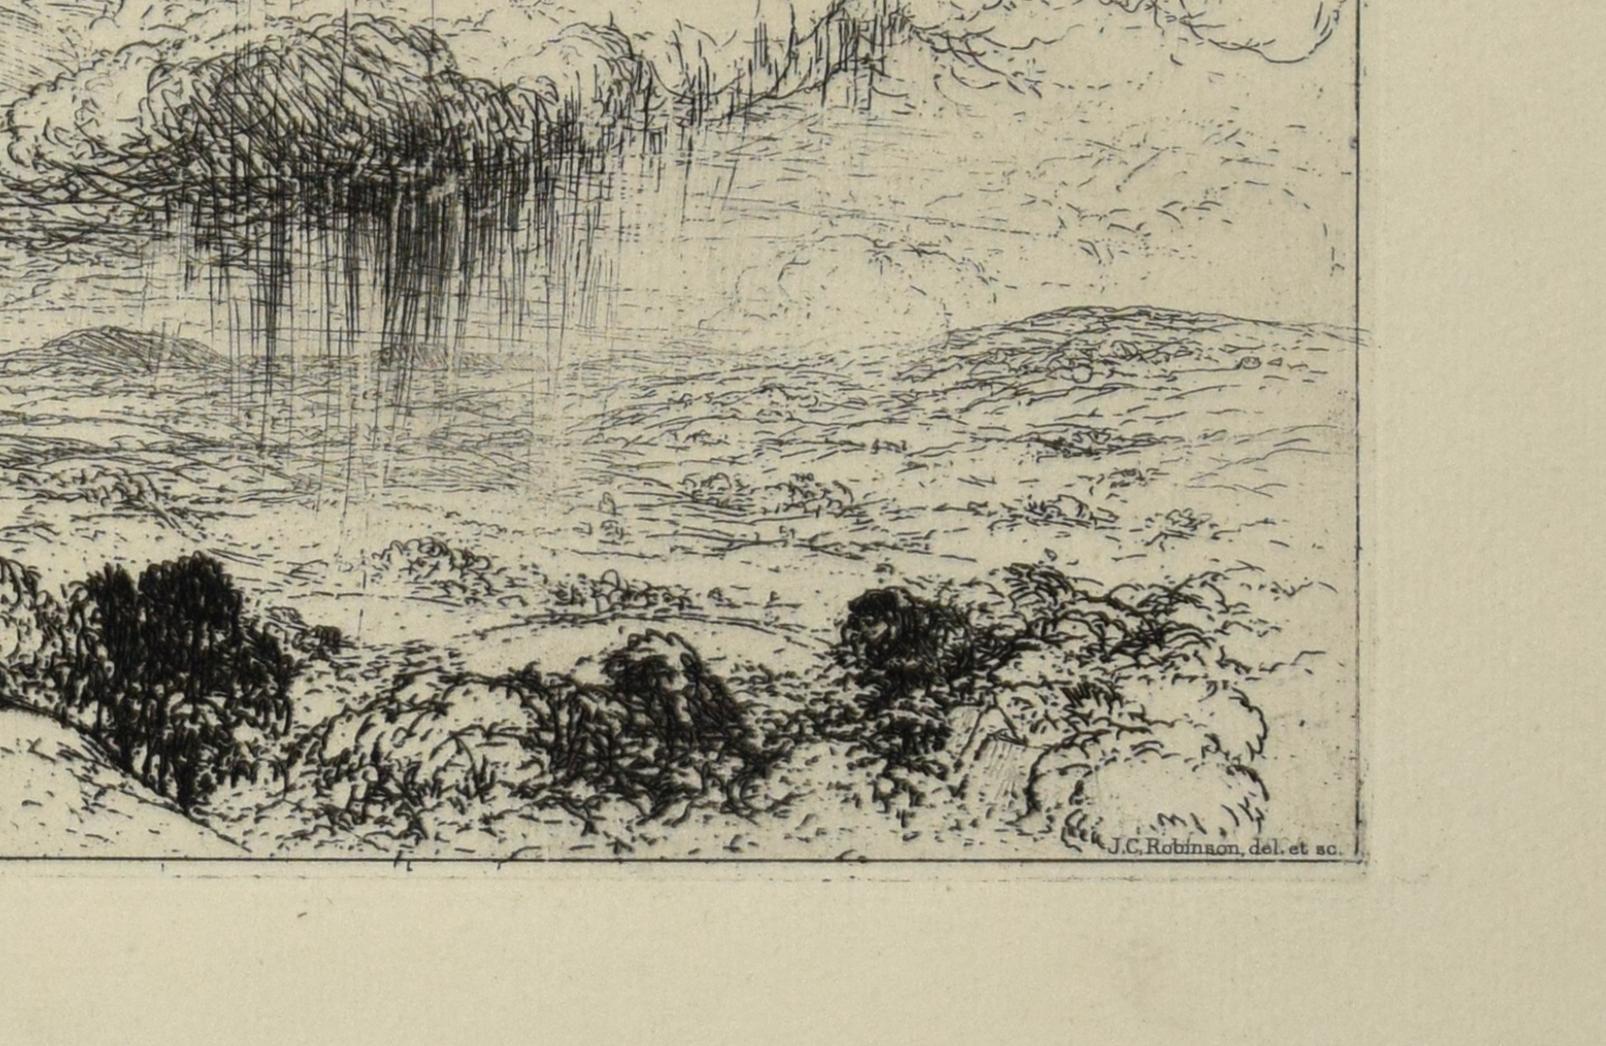 The Storm over the Landscape - Original Etching by J.C. Robinson - 1872 - Print by John Charles Robinson